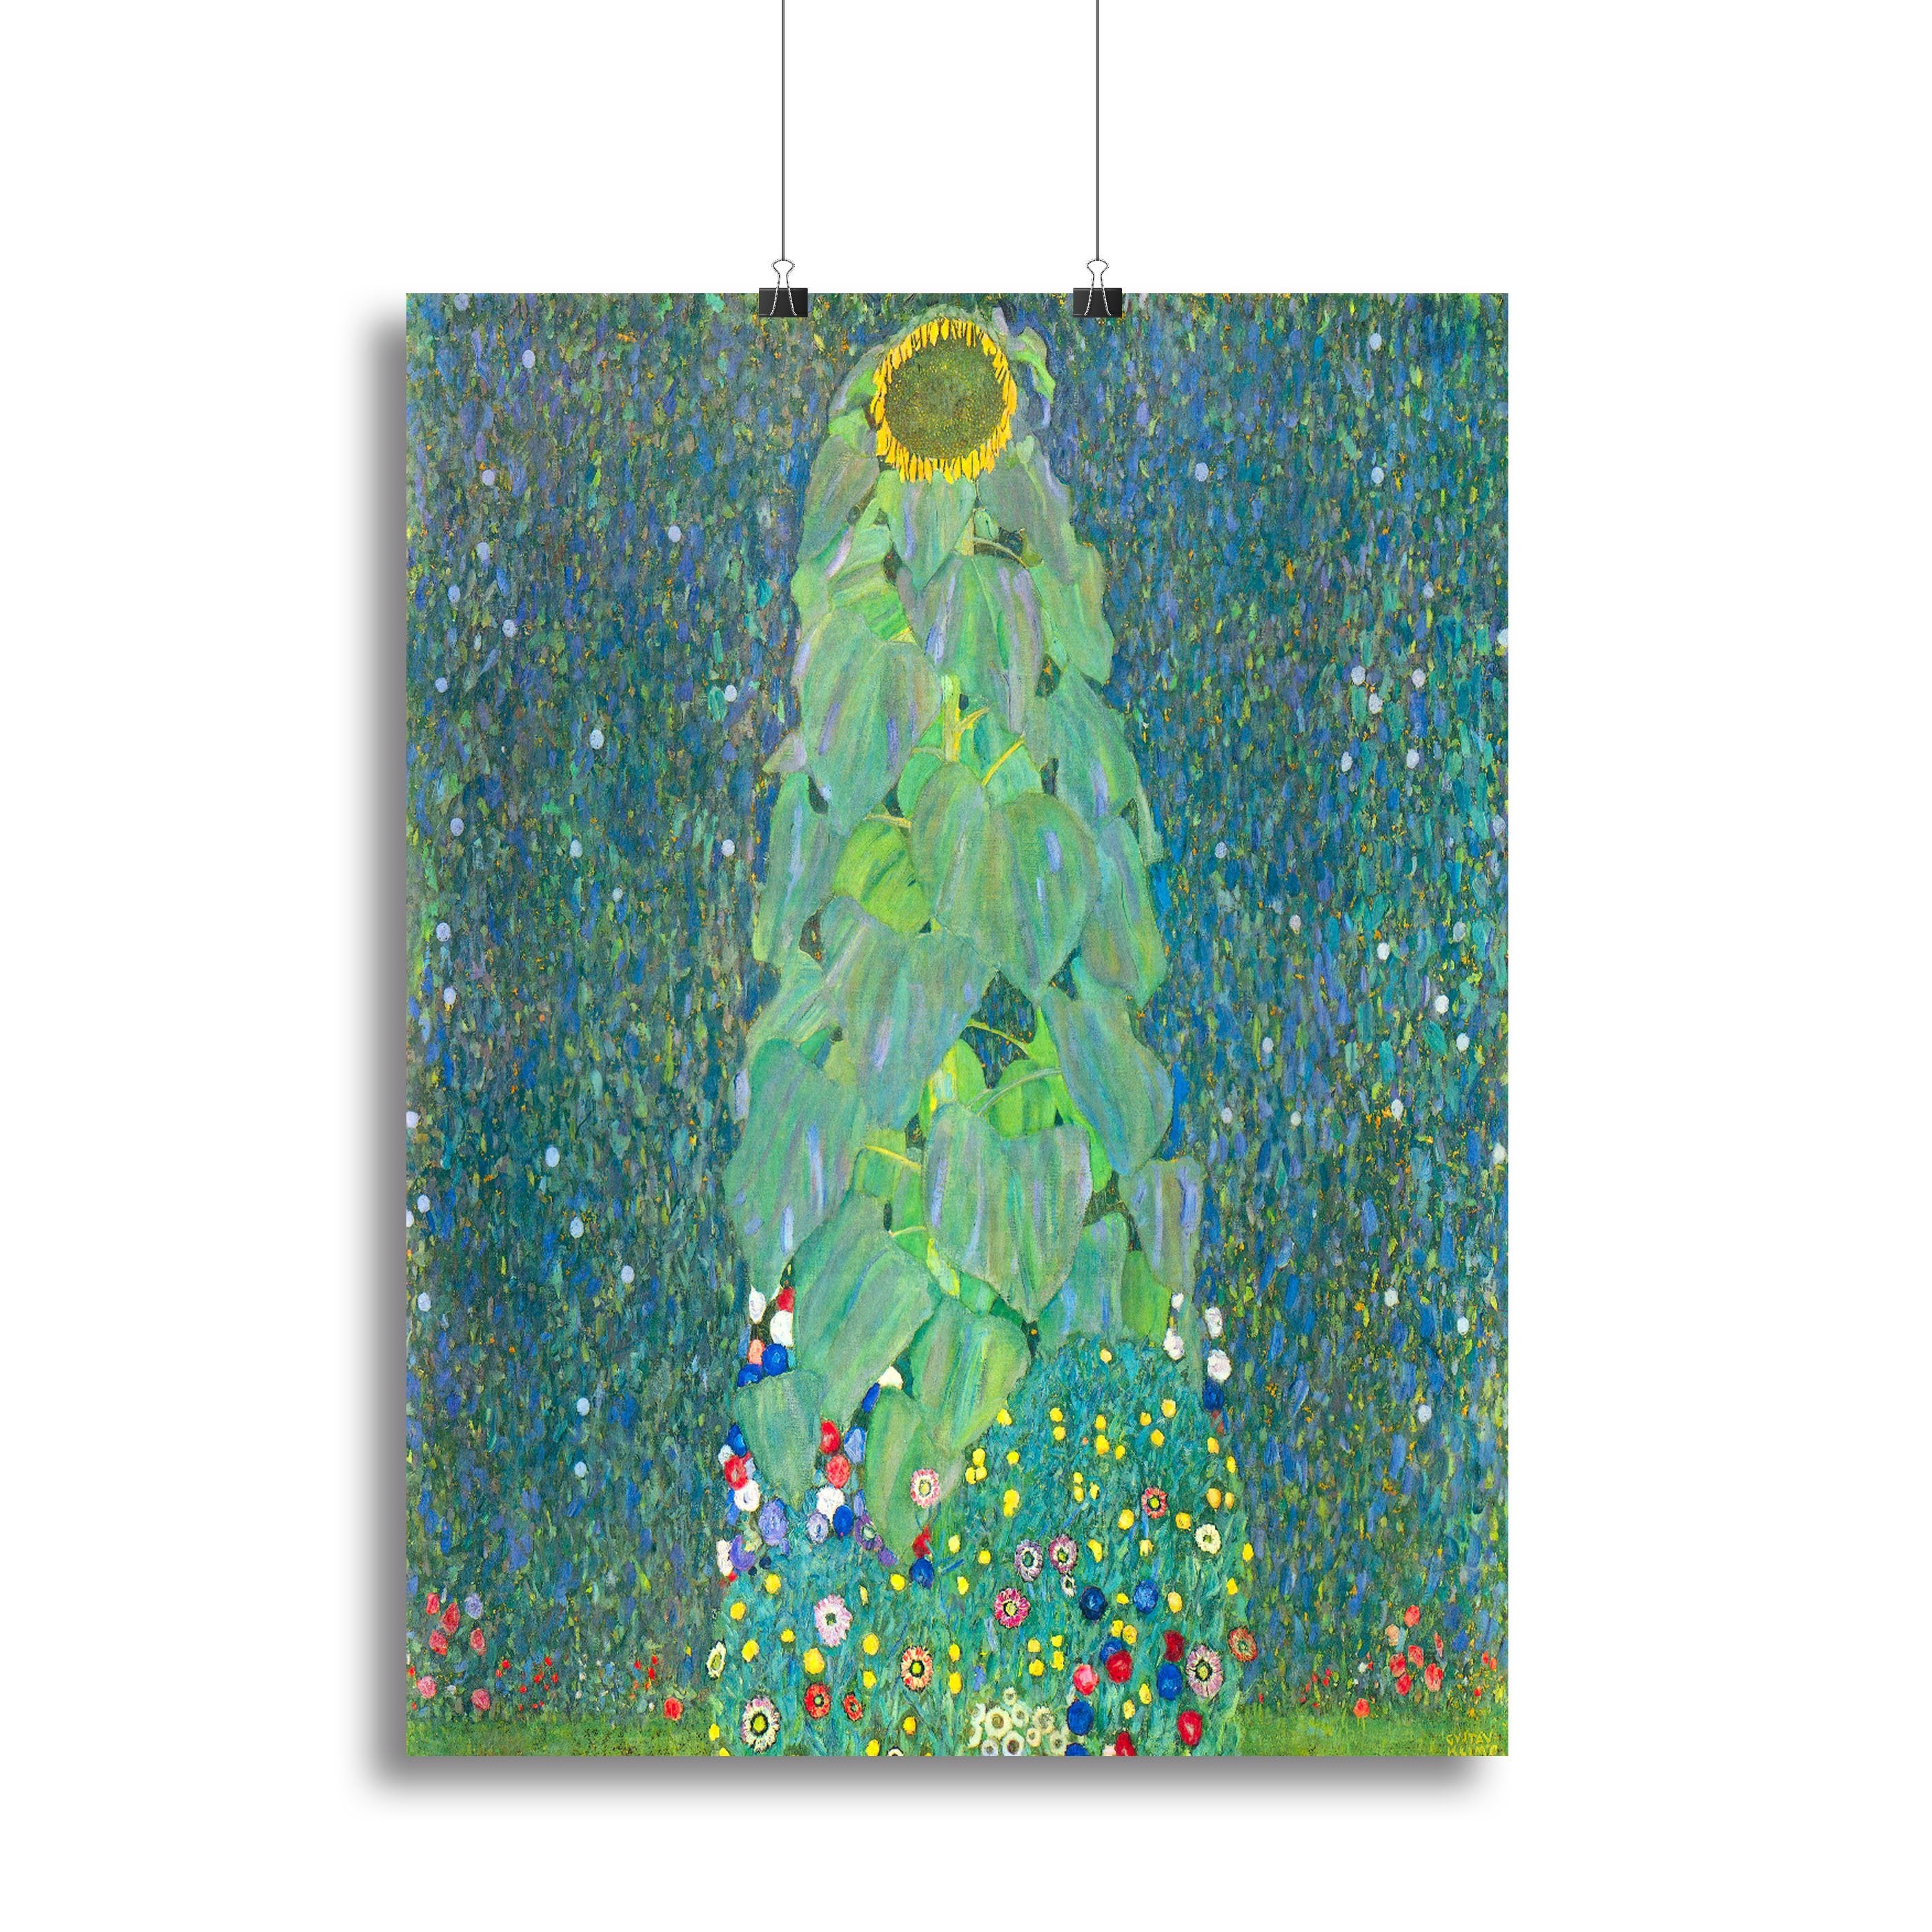 The Sunflower by Klimt Canvas Print or Poster